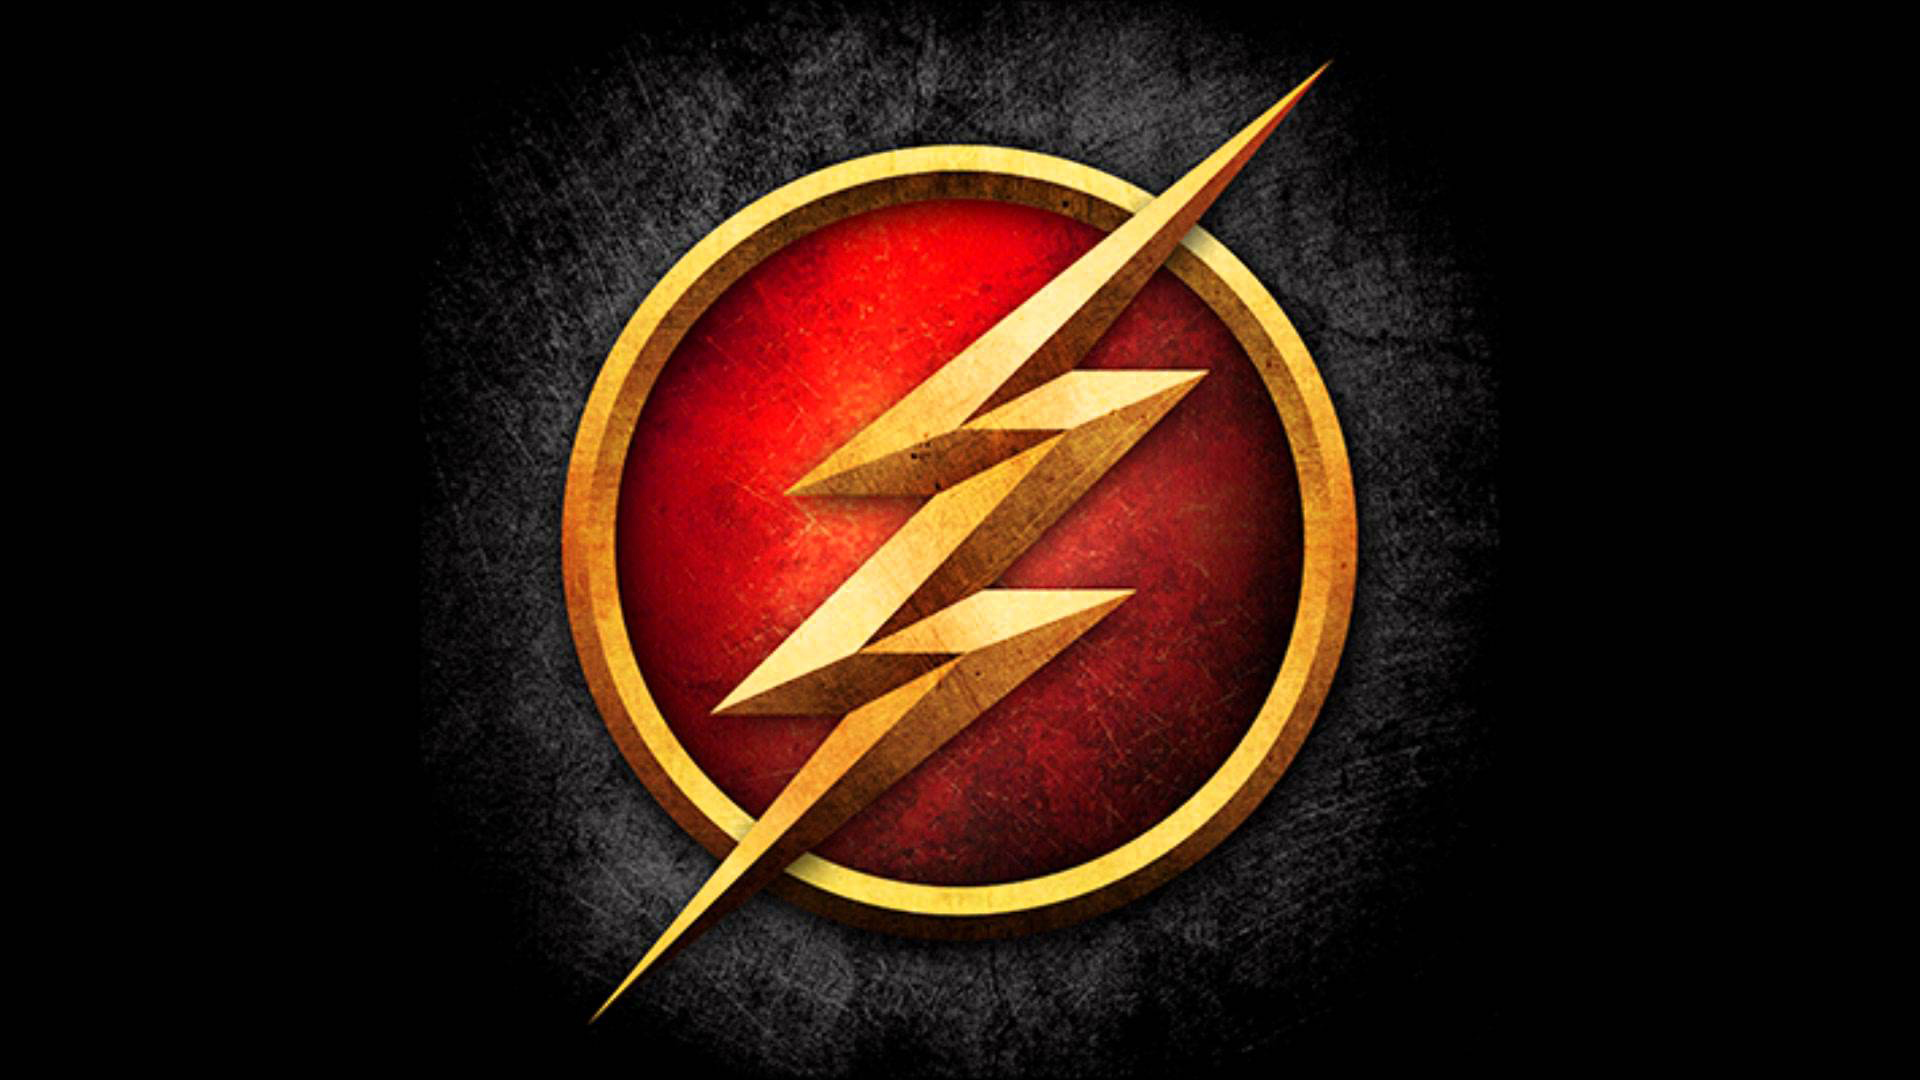 The Flash logo Wallpaper Images | HD Movie Wallpapers